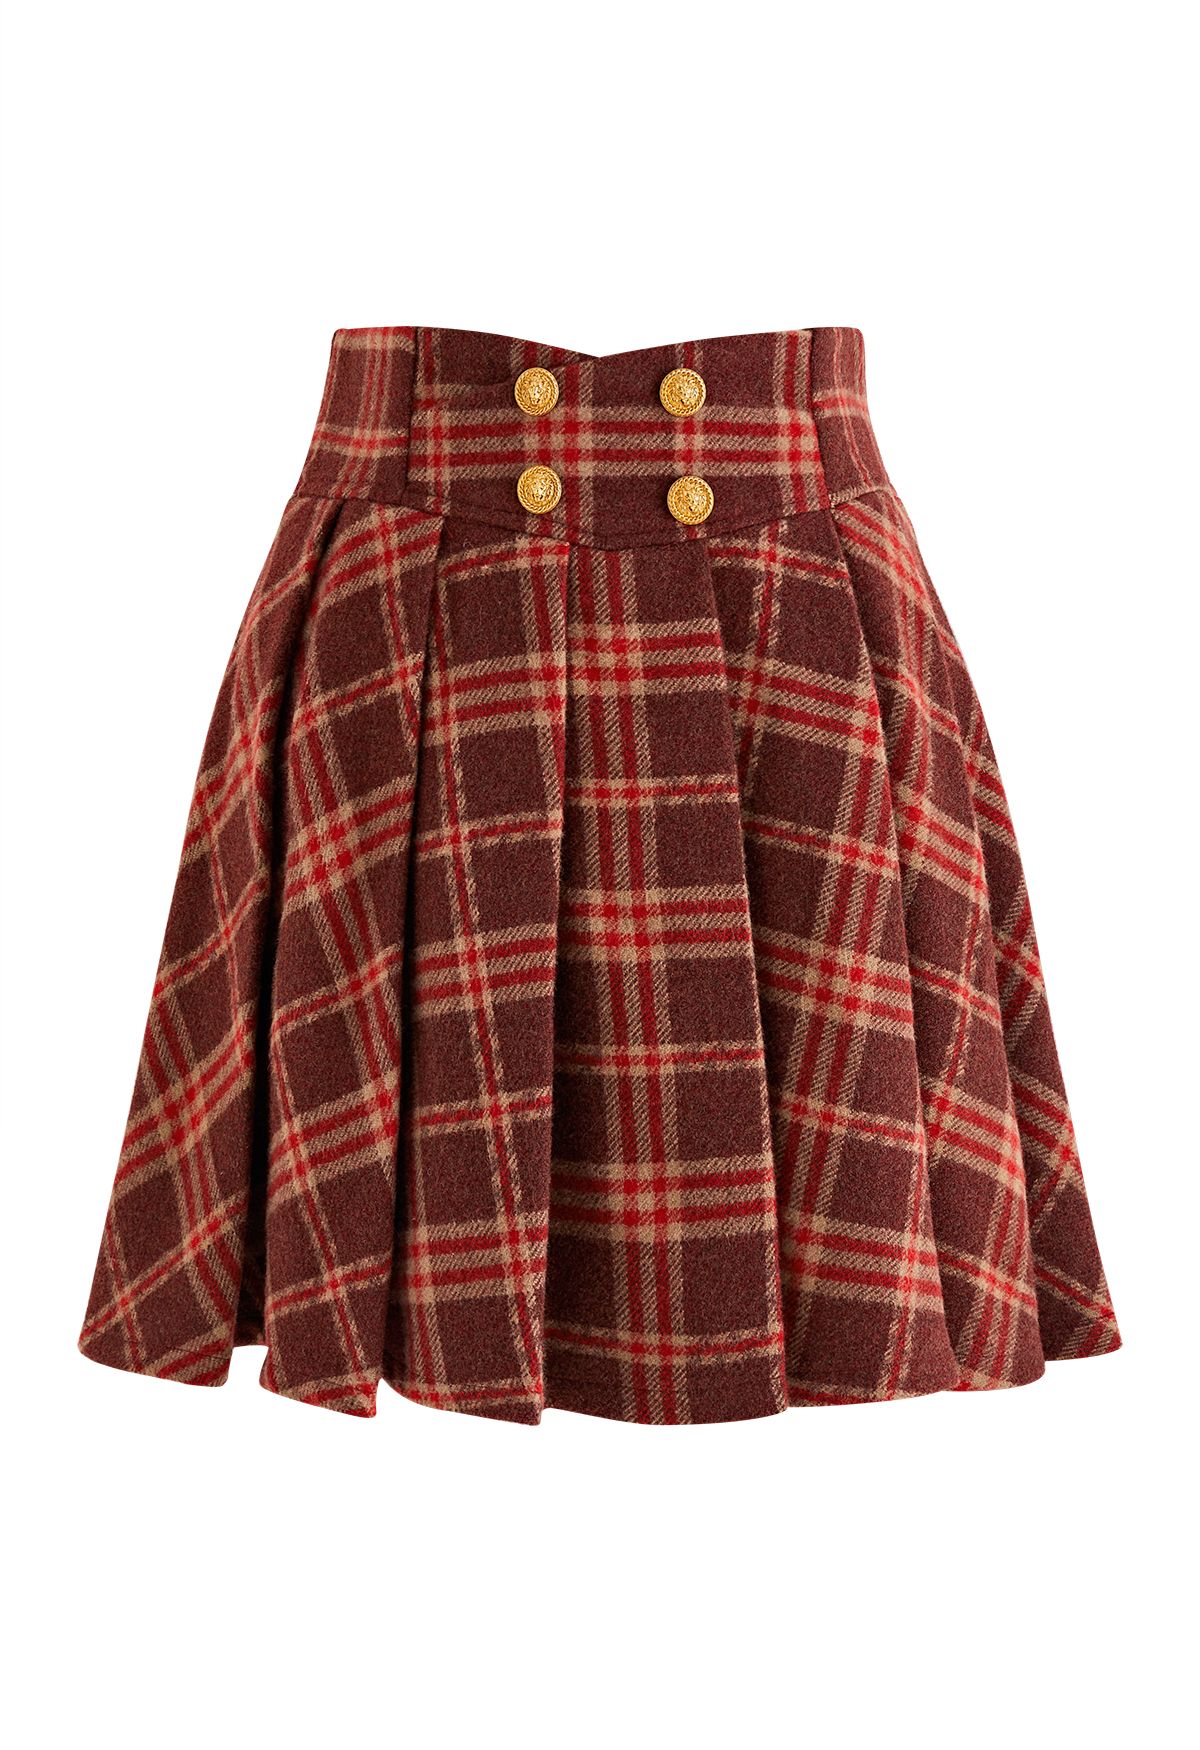 Golden Button Pleated Flare Mini Skirt in Red Plaid - Retro, Indie and ...